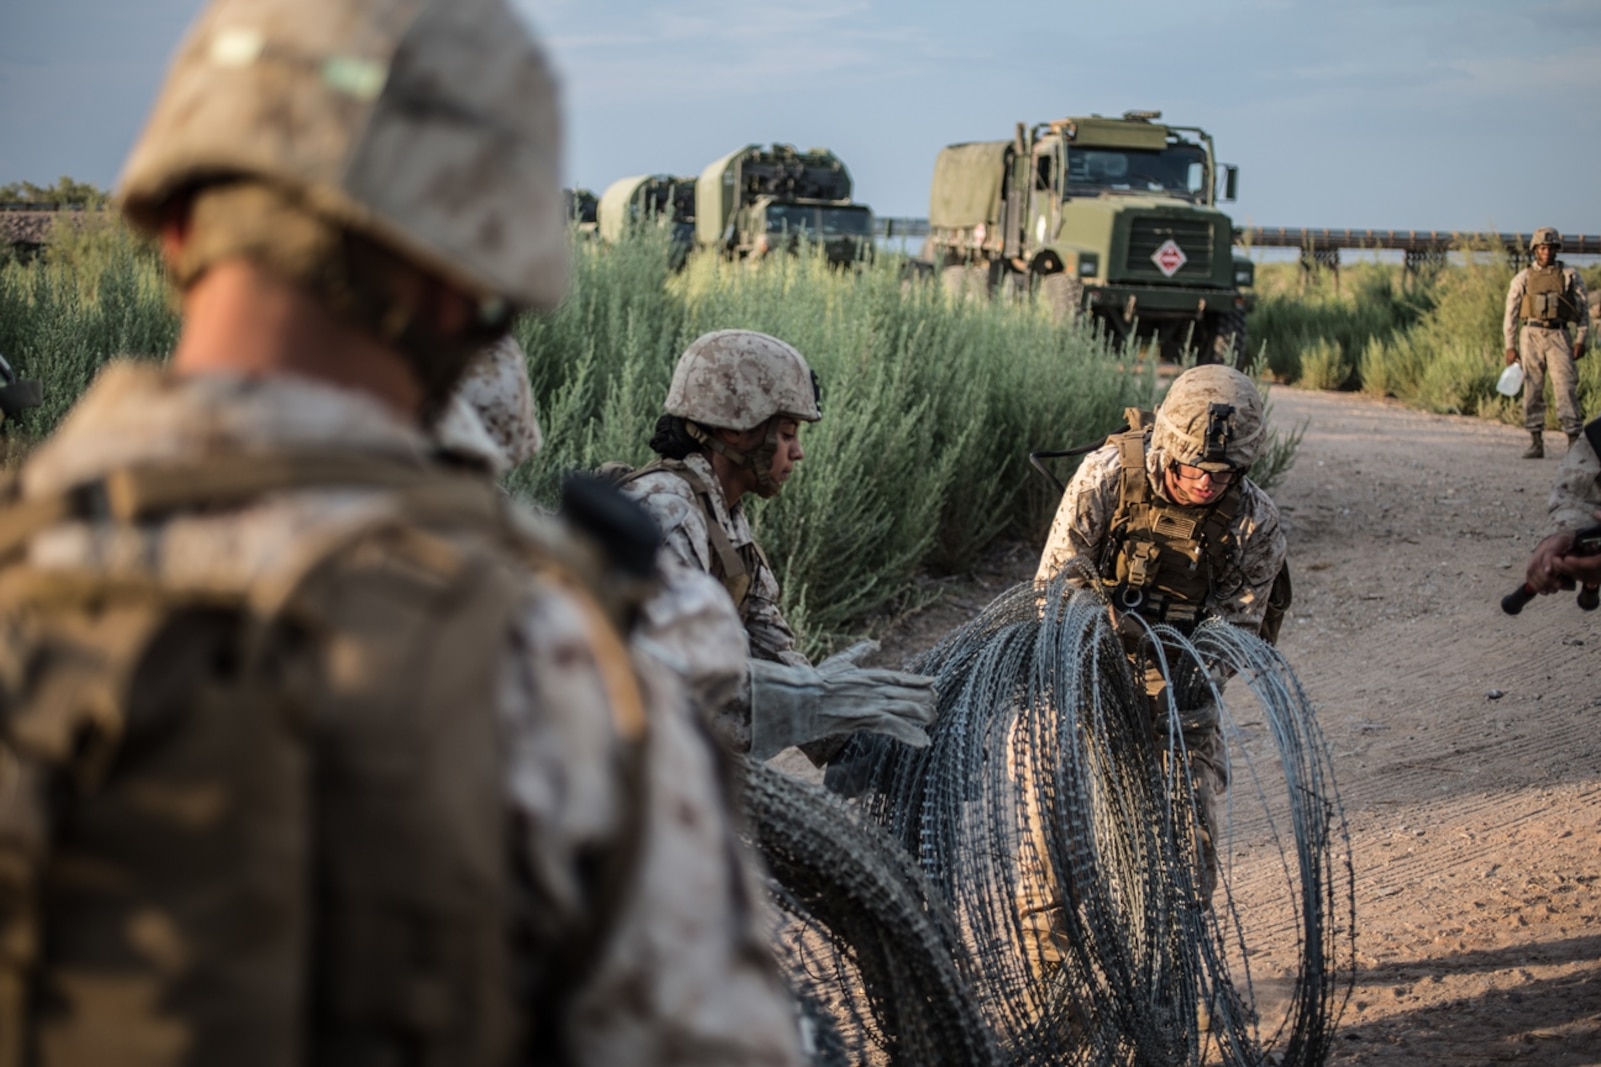 U.S. Marines with Bridge Company, 7th Engineer Support Battalion, 1st Marine Logistics Group, prepare to move concertina wire to various locations during Exercise Deep Strike II at Blythe, Calif., Sept. 6, 2017. Concertina wire is strategically placed and used to simulate setting up a forward operating base (FOB) while deployed. The concertina wire and other defensive barriers are used keep unknown persons out of the FOB and to control access. (U.S. Marine Corps photo by Lance Cpl. Timothy Shoemaker)